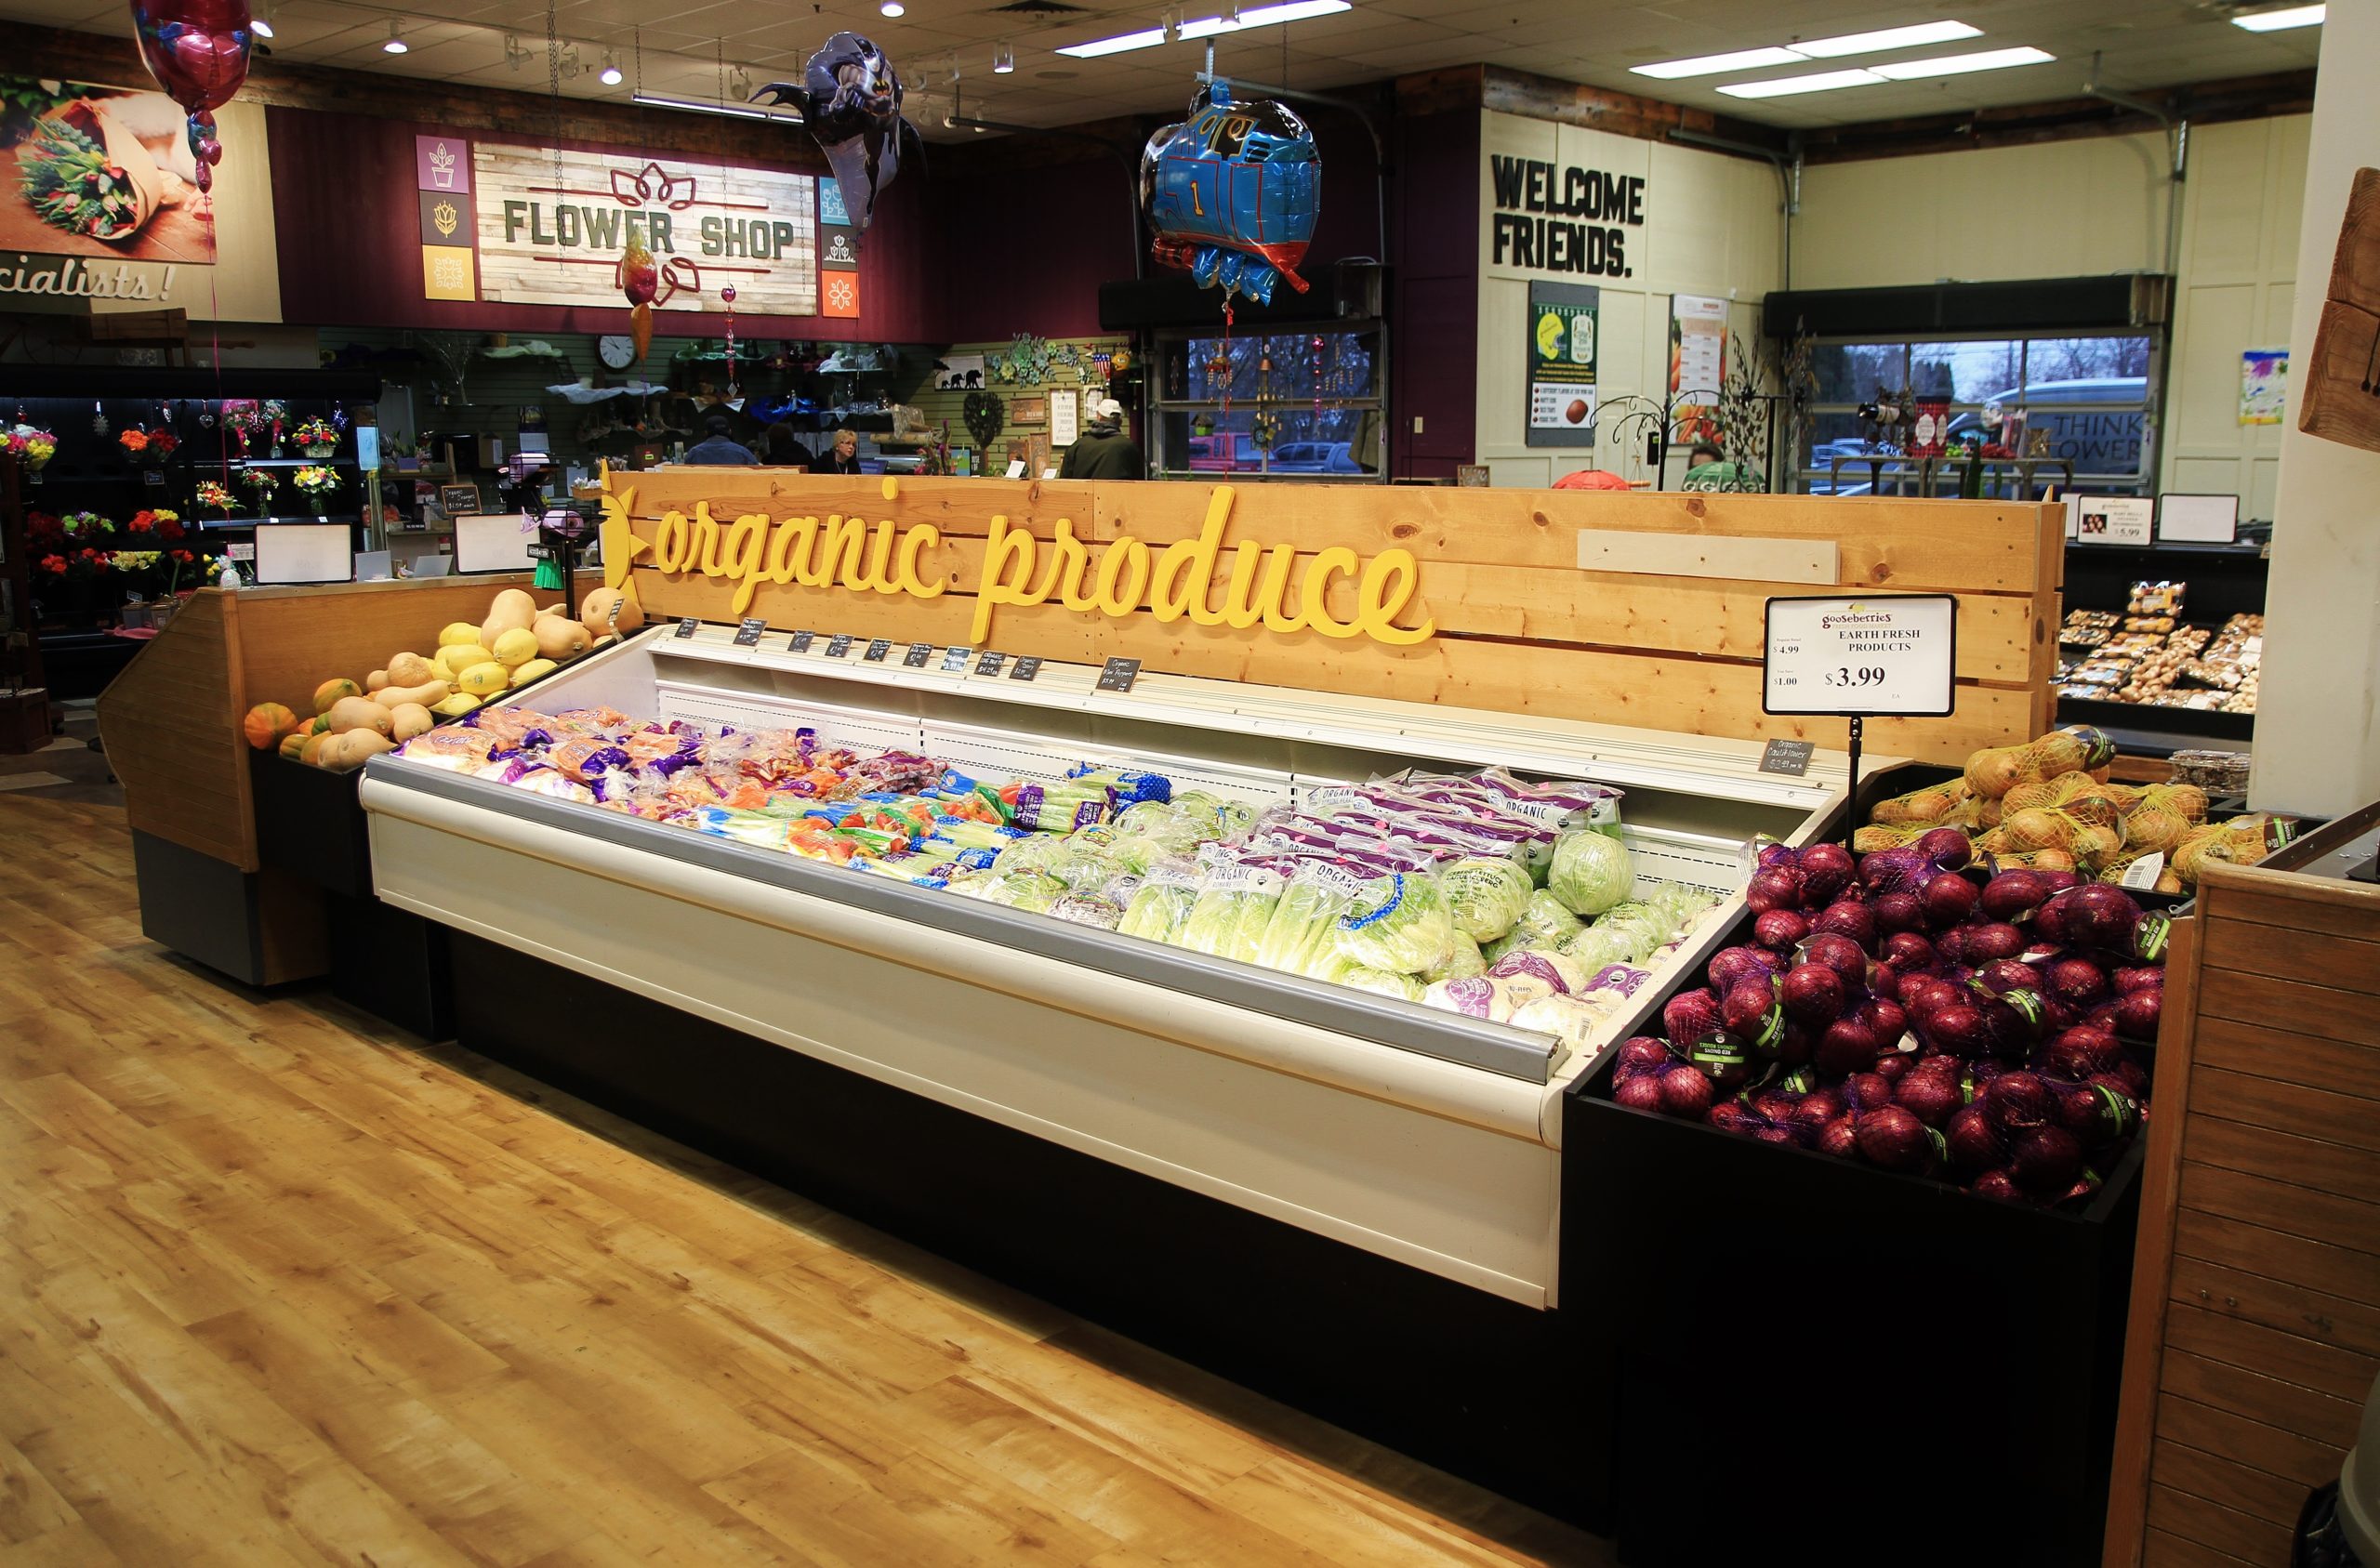 StoreMasters integrated a specialty floral department into the produce department to expand on the freshness component